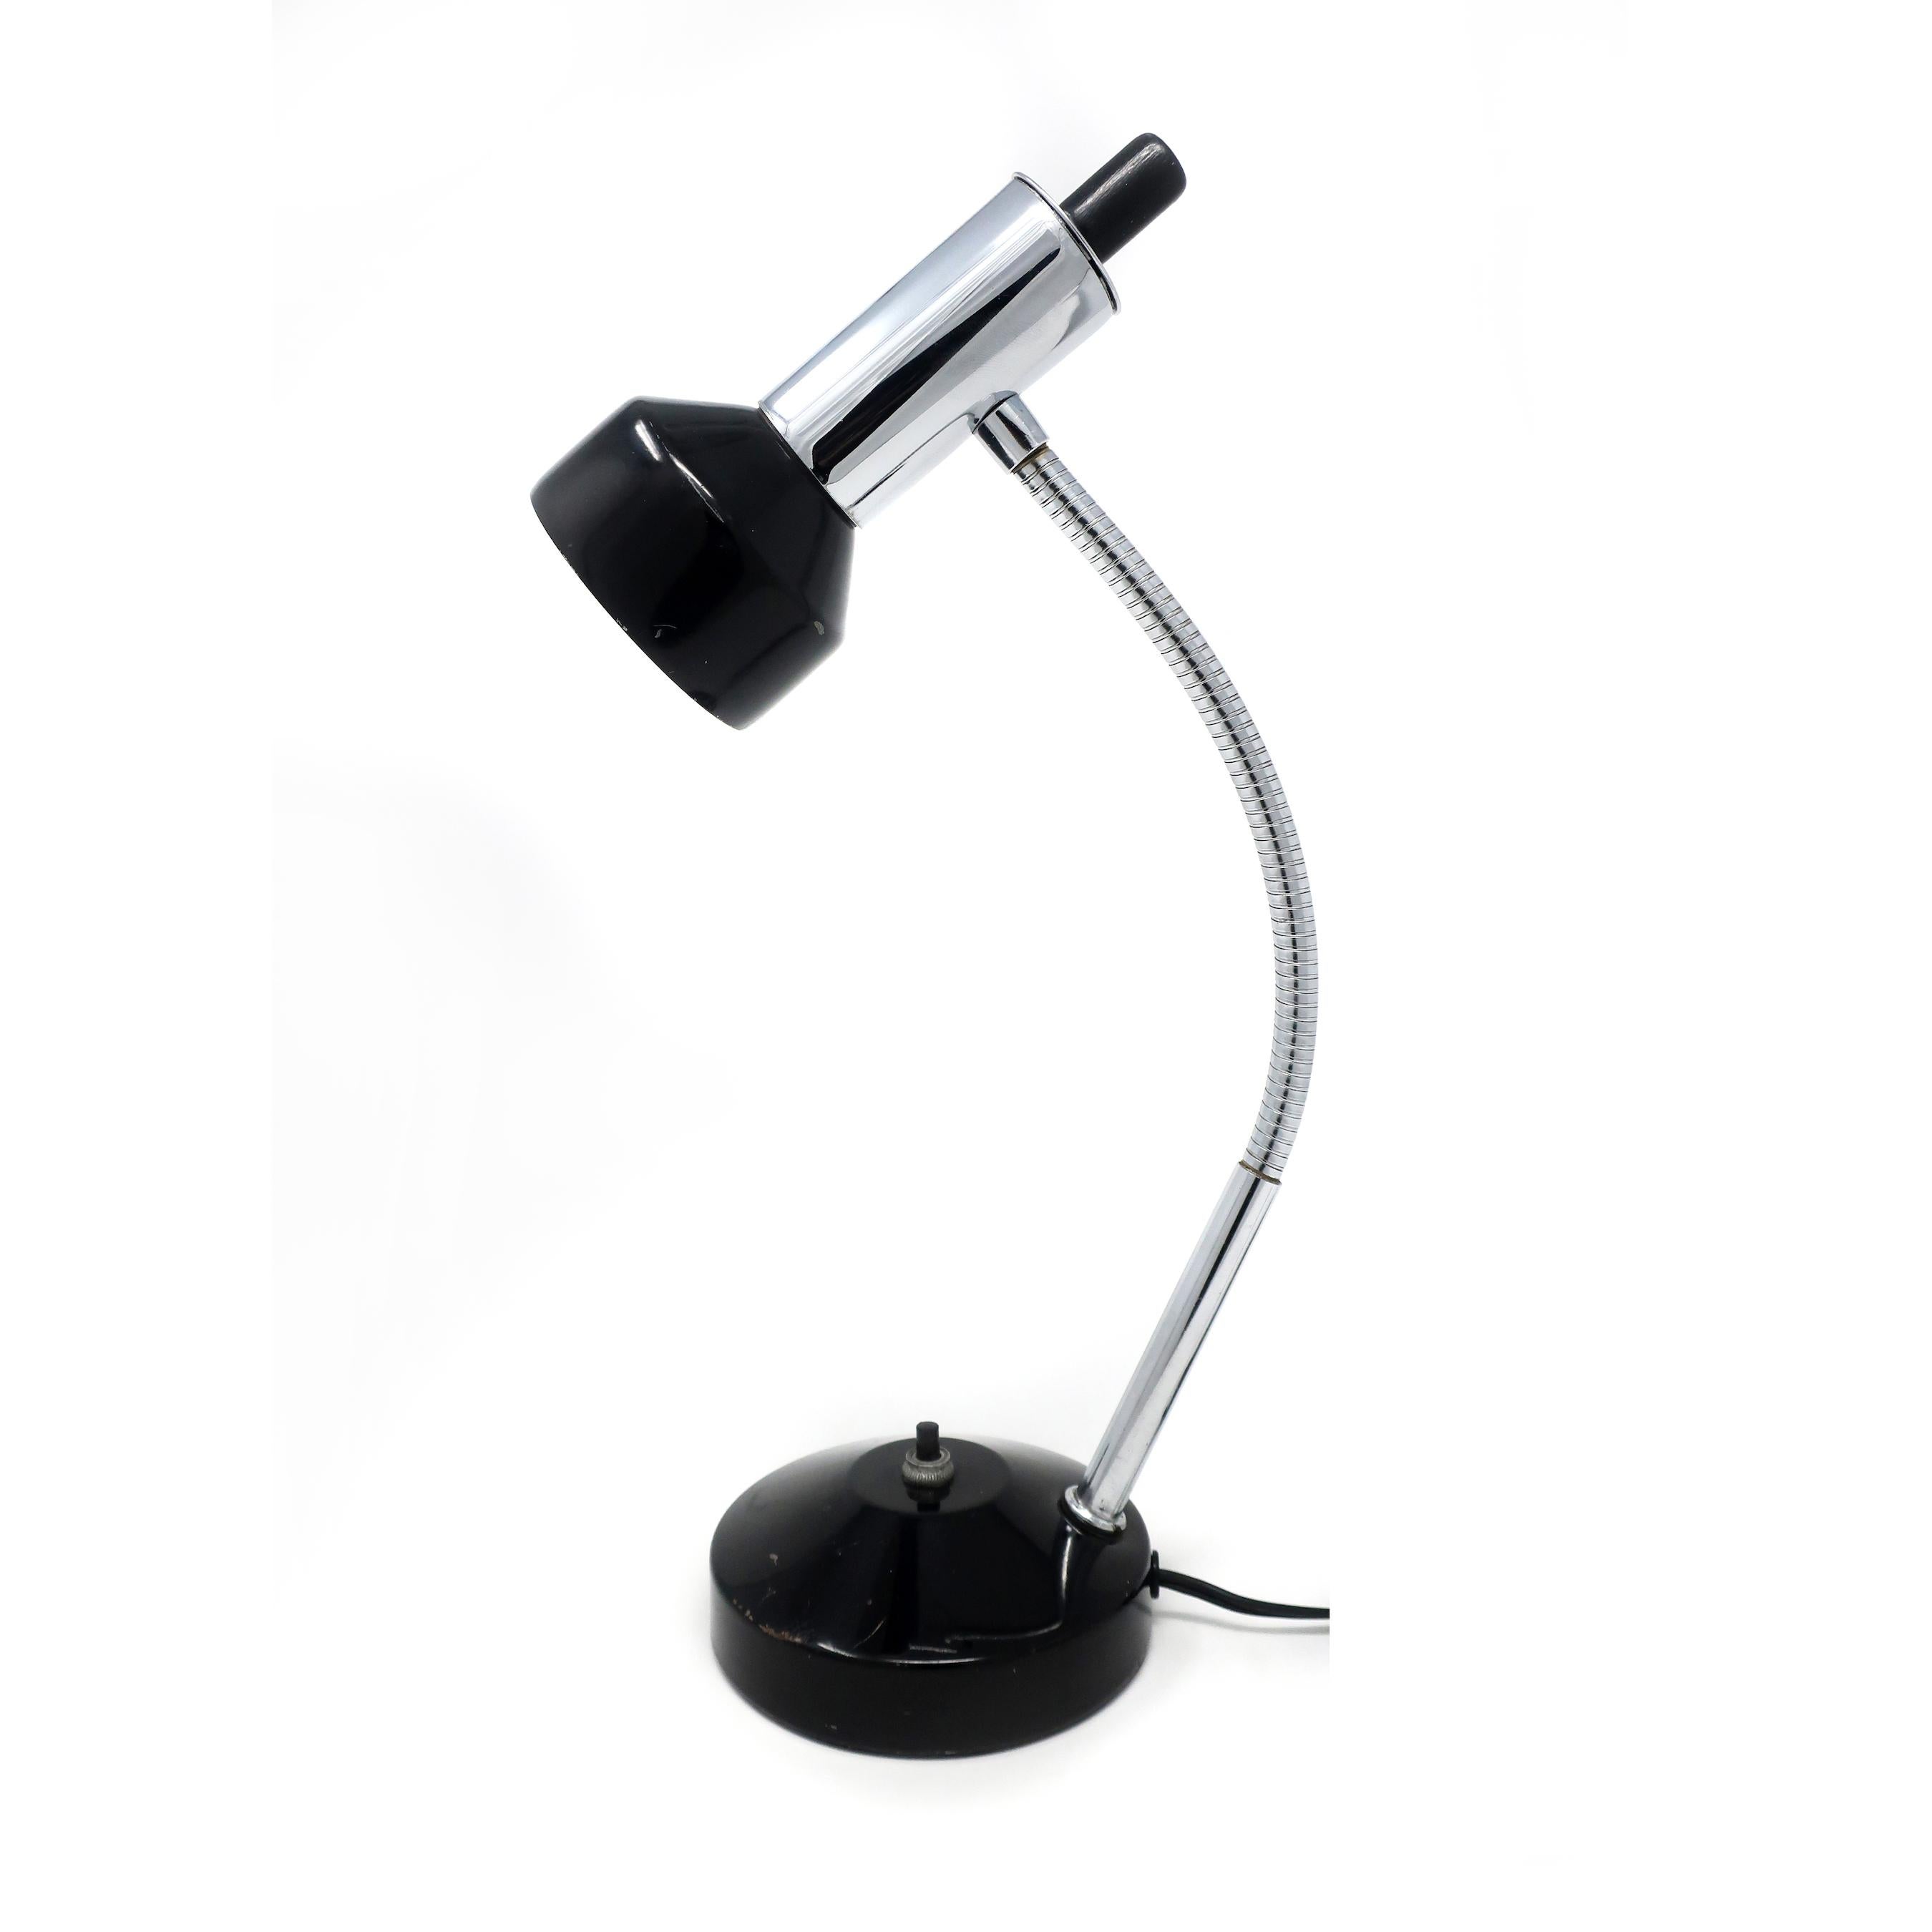 A lovely Mid-Century Modern desk lamp with black metal base and shade and a chrome stem/gooseneck. Perfect for an office or as accent lighting. In good vintage condition with wear consistent with age and use, including marks on base and inside of